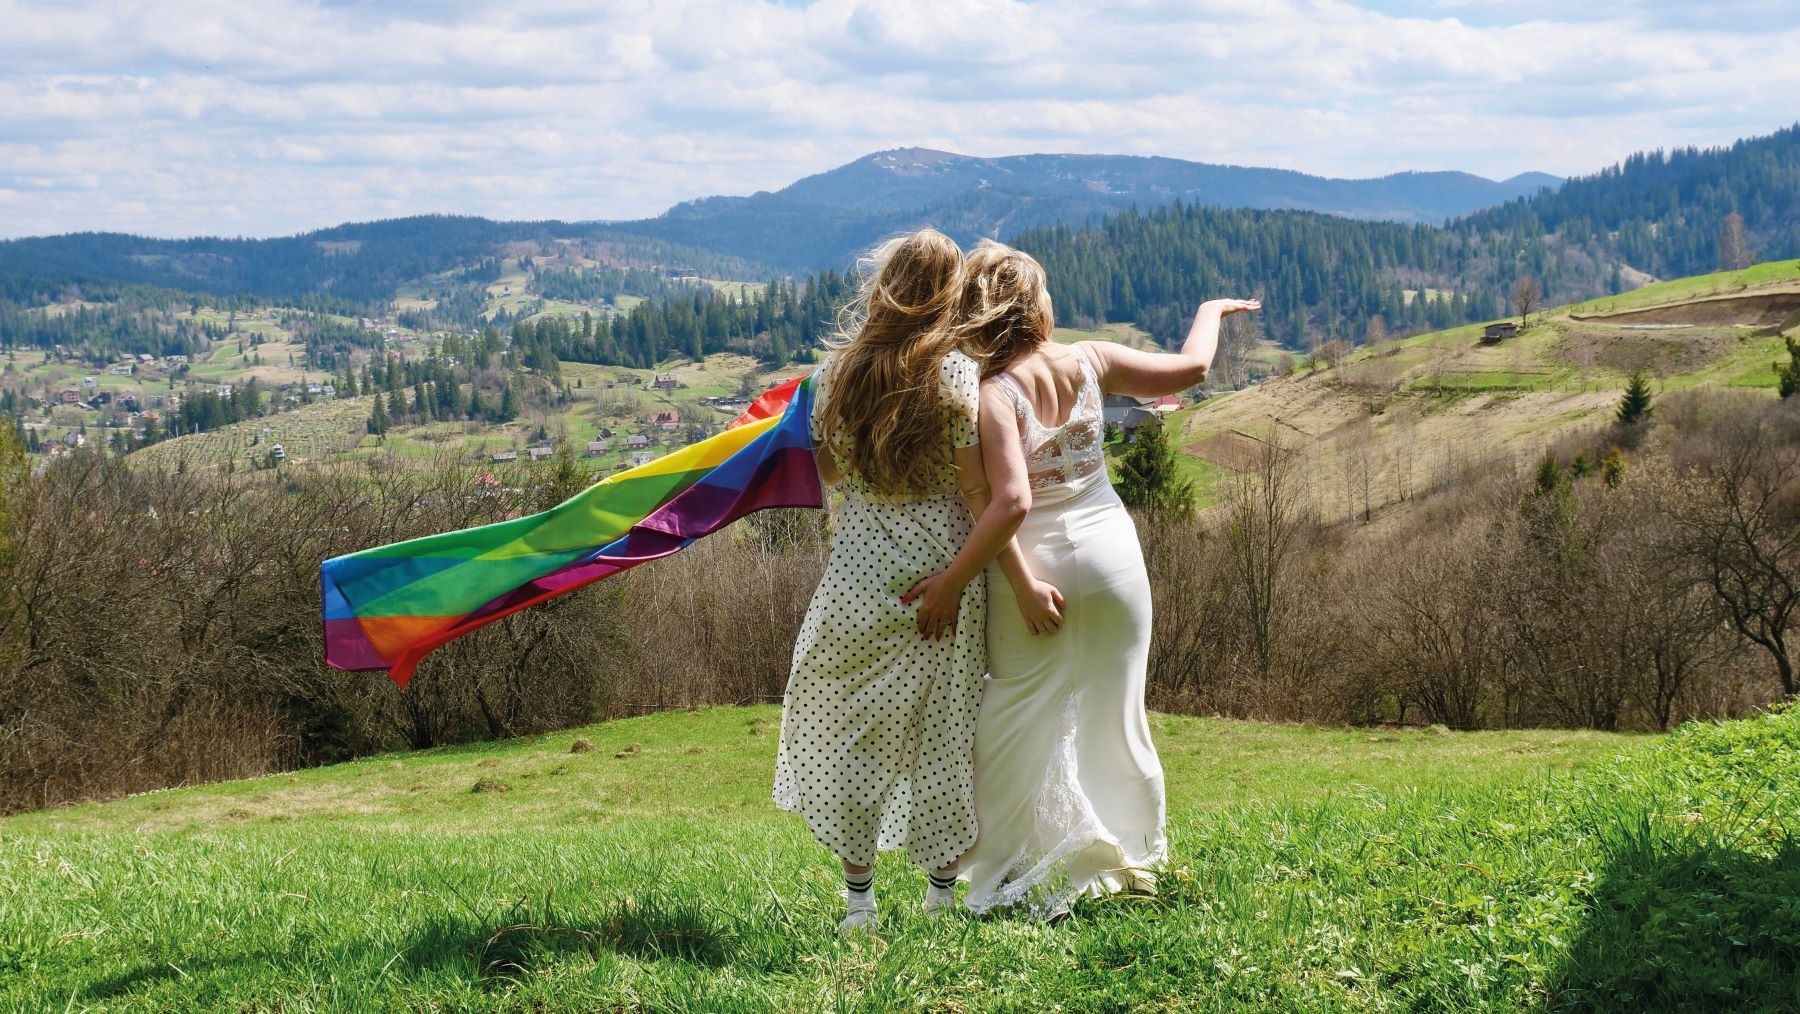 A pair of brides waving the rainbow flag on their wedding day